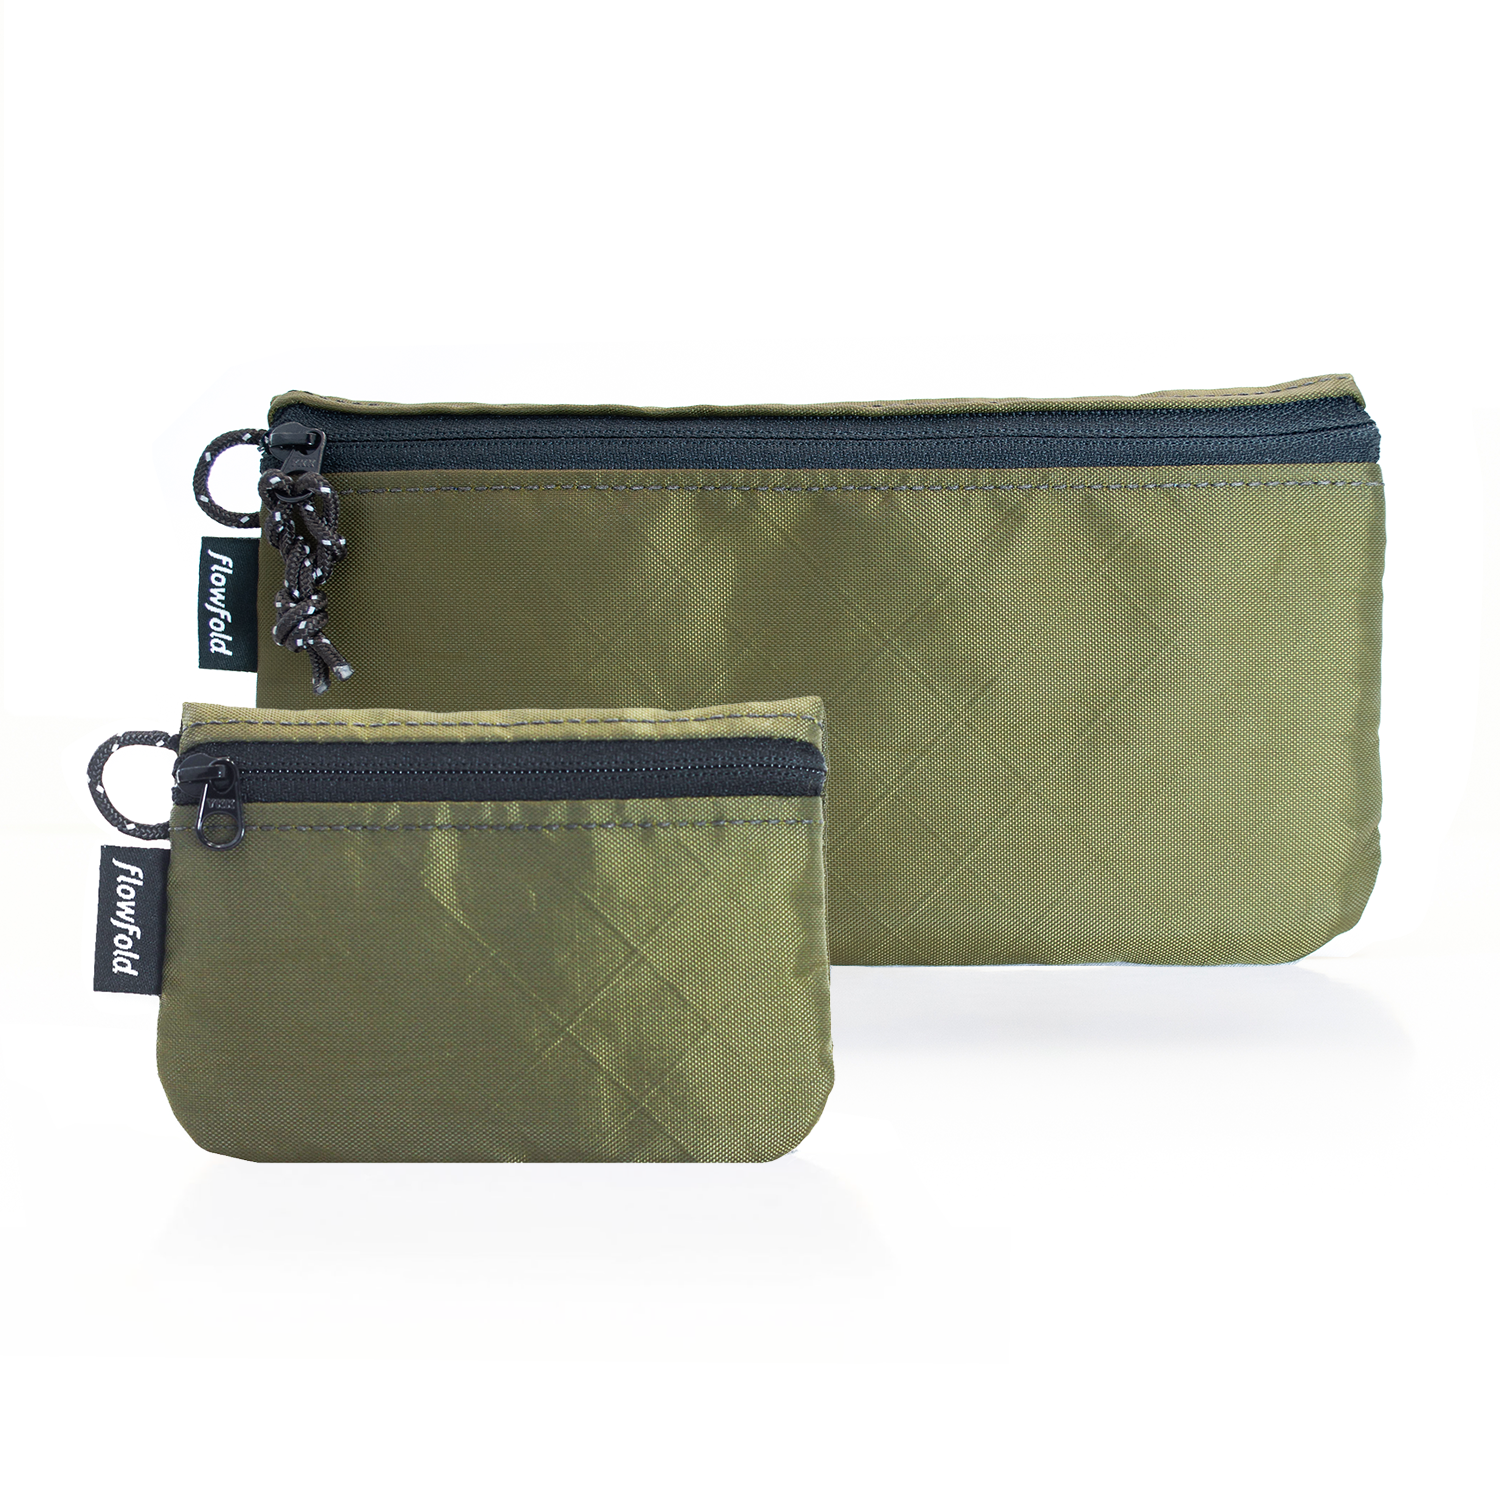 Flowfold Camden Kit: Creator Large Zippered Women's Wallet For Cash, Cards, and Phone + Essentialist Zipper Pouch, Recycled Olive